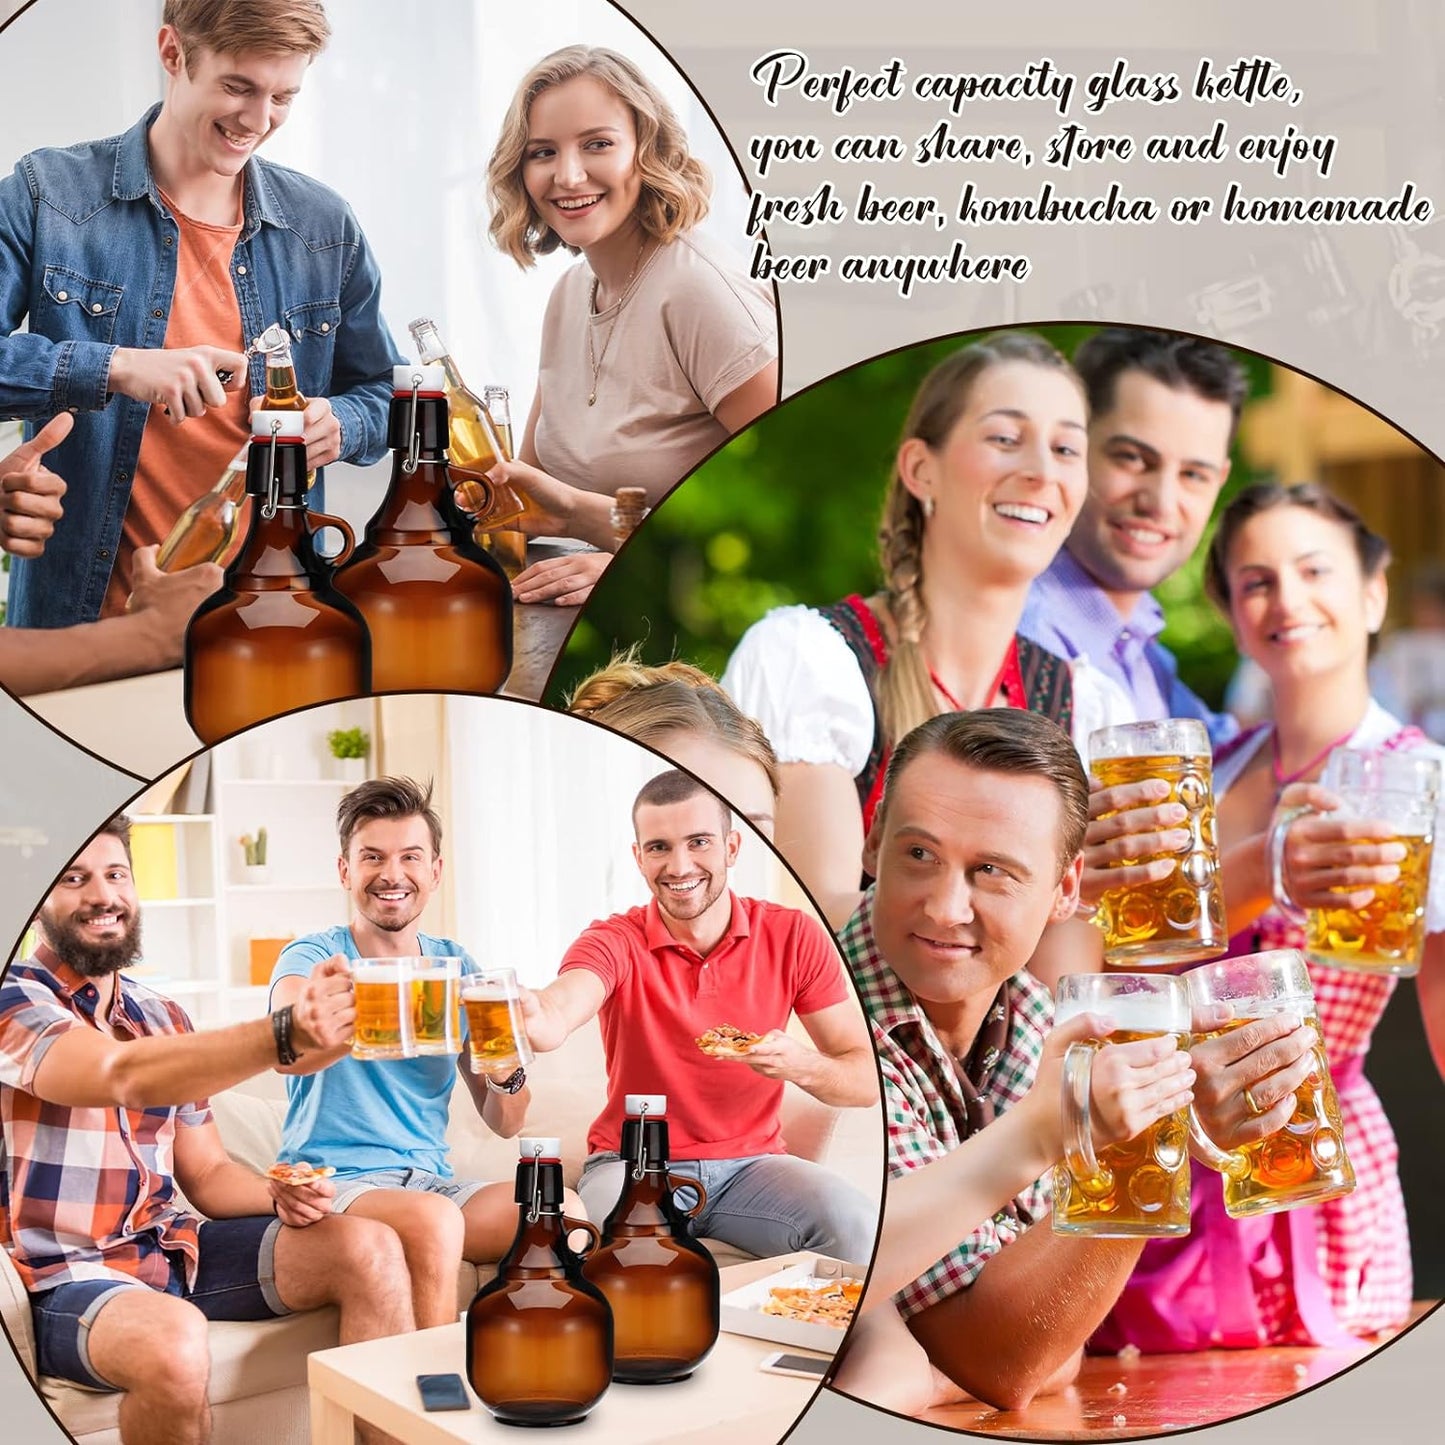 4 Pcs Growlers for Beer Amber Glass Bottles Beer Bottles Glass Jar with Lid Glass Jugs Soda Cider Alcohol Wine Home Brewing Fermenting (34 oz)